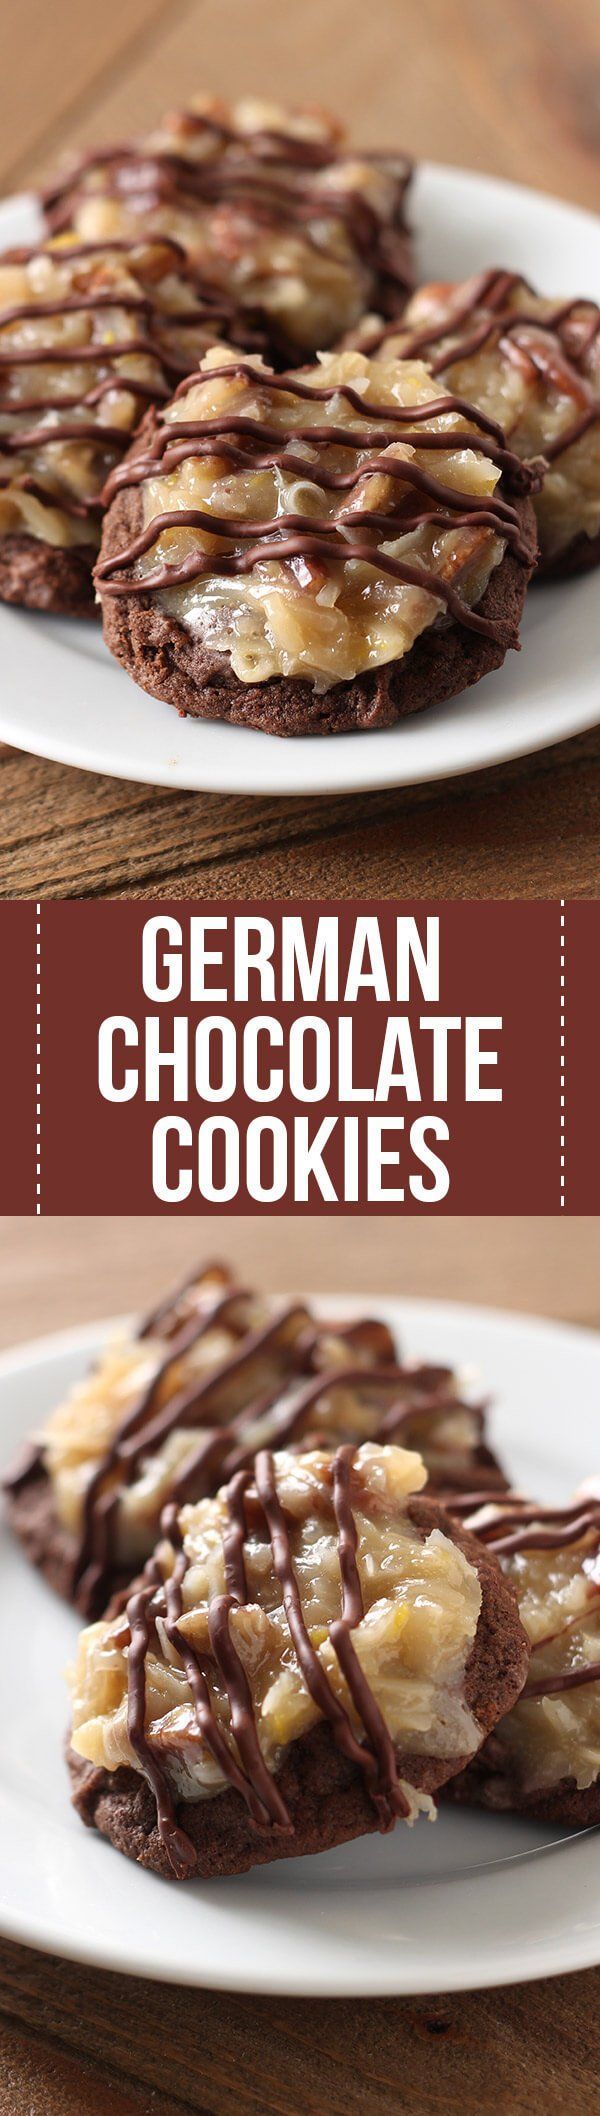 Oh my YUM!! German Chocolate Cookies feature a homemade ultra soft, chewy, gooey d